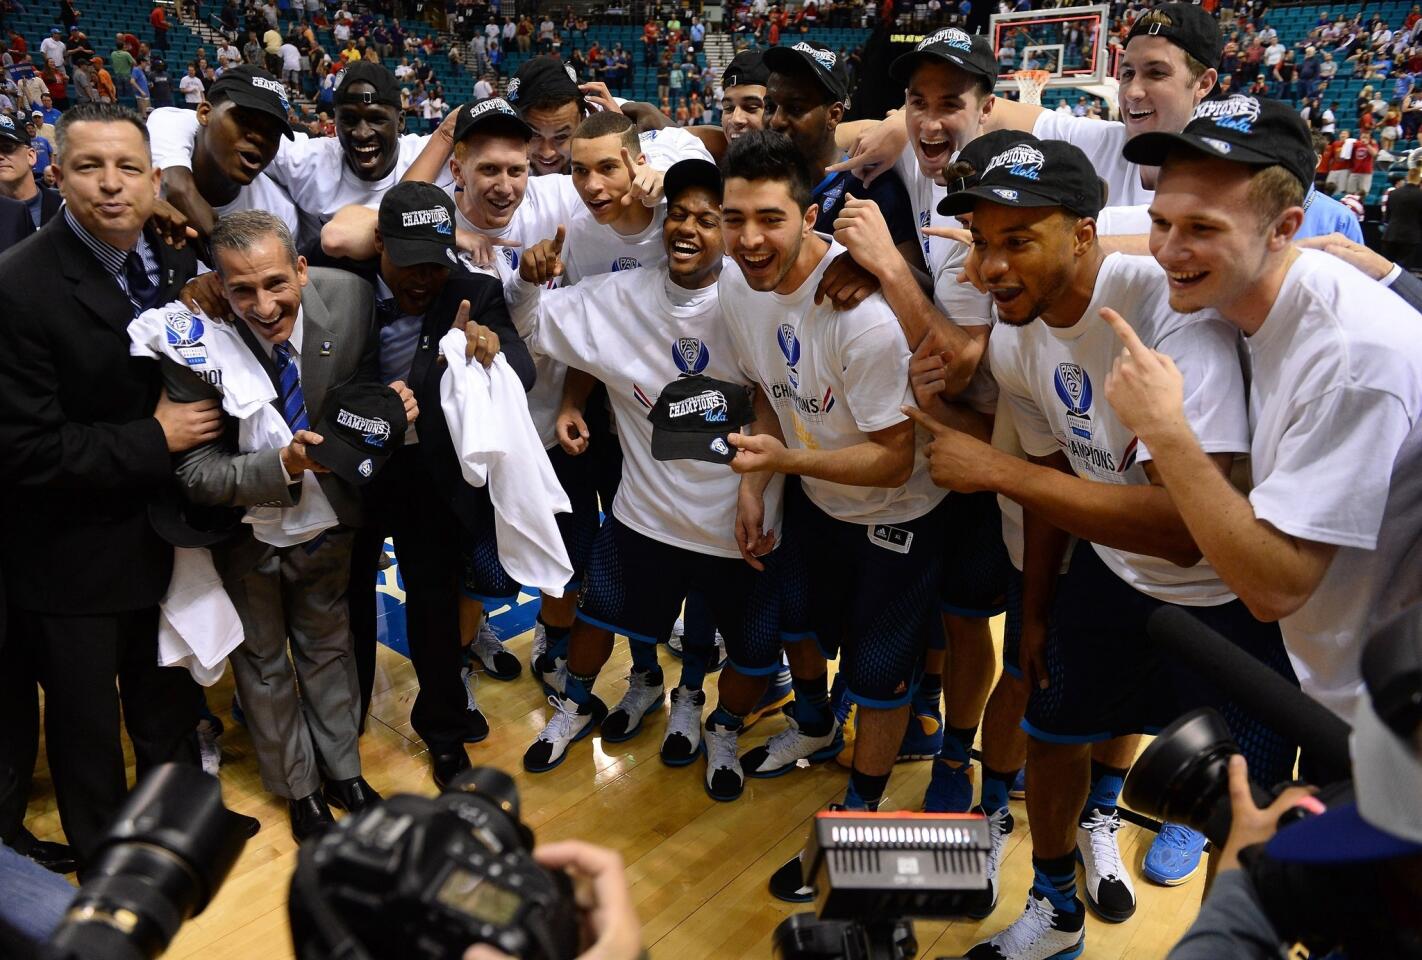 UCLA players celebrate their 75-71 upset win over Arizona in the Pac-12 tournament title game at the MGM Garden Arena in Las Vegas on Saturday.